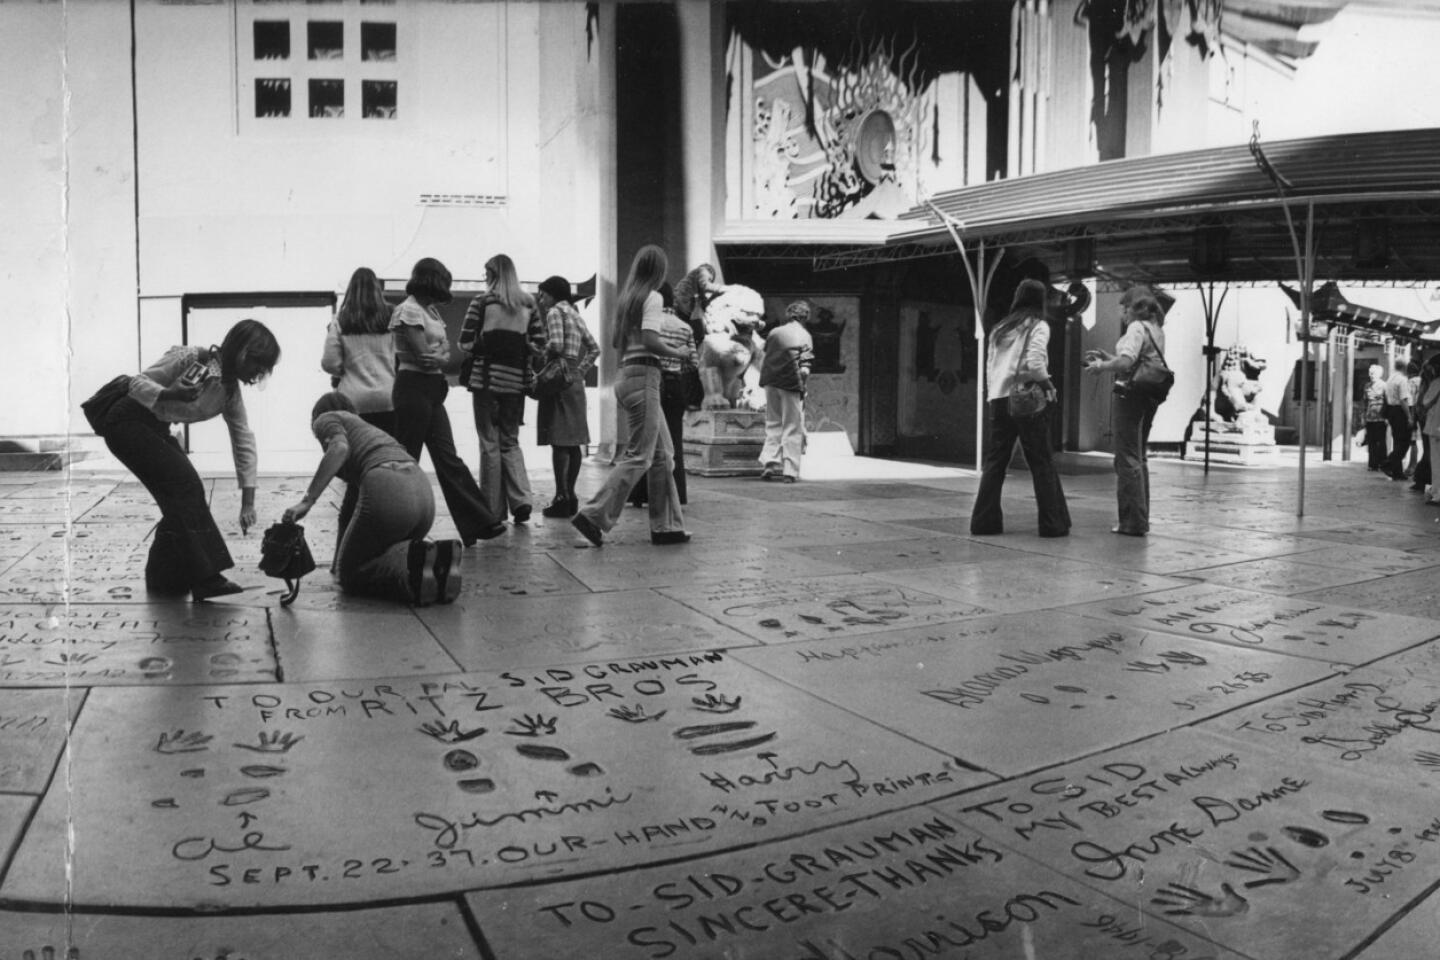 Forecourt of Grauman's Chinese Theater, Hollywood California, 1968